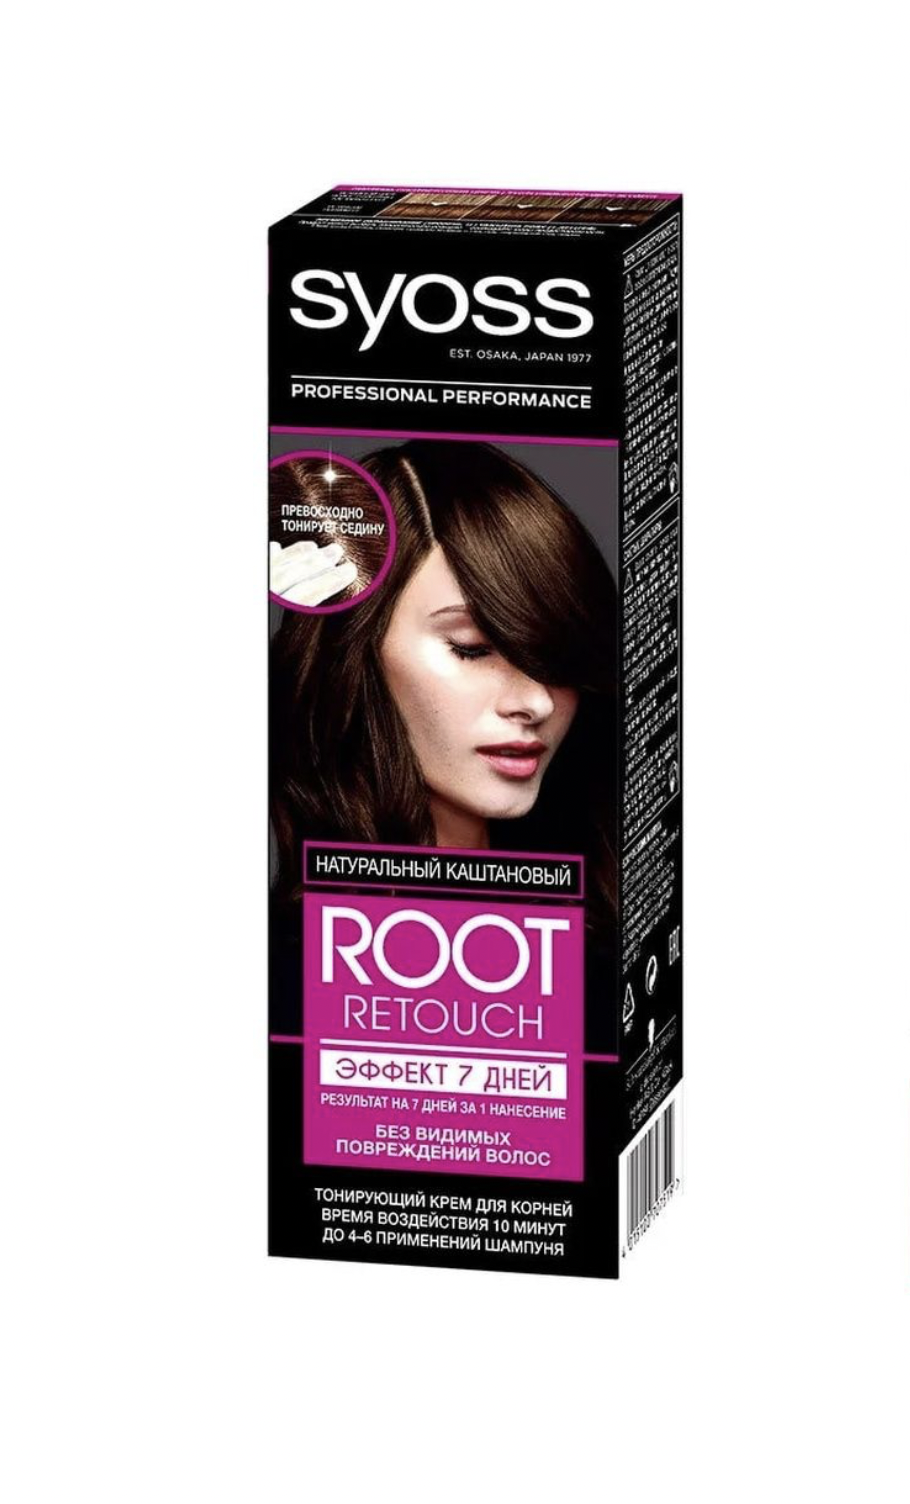   / Syoss Root Retouch - -      60 